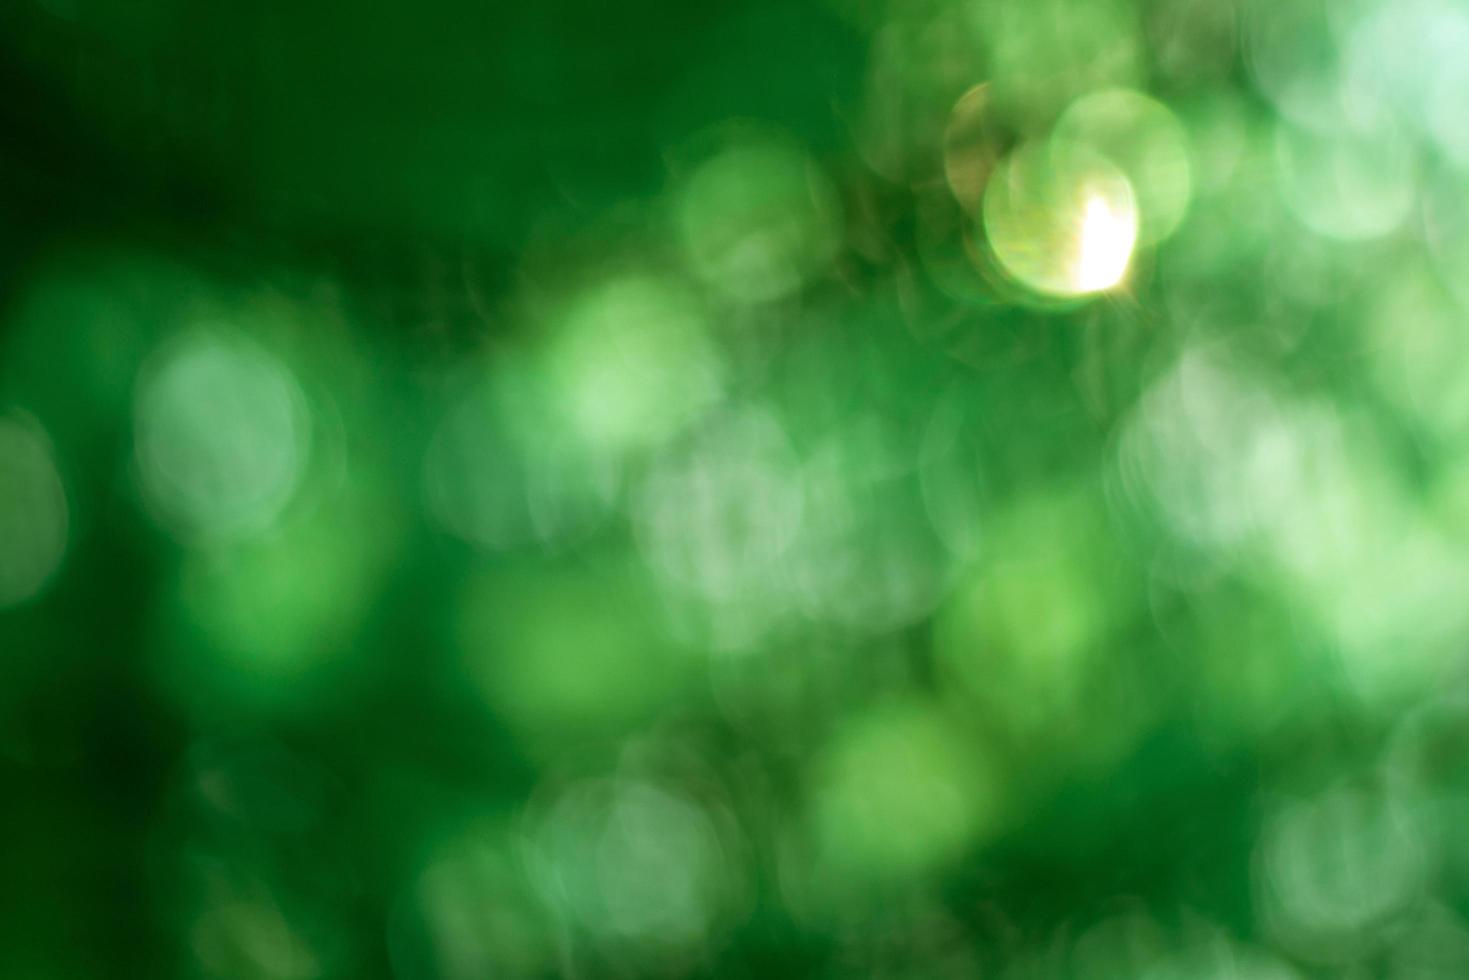 Abstract blur with bokhe of light through the green trees photo